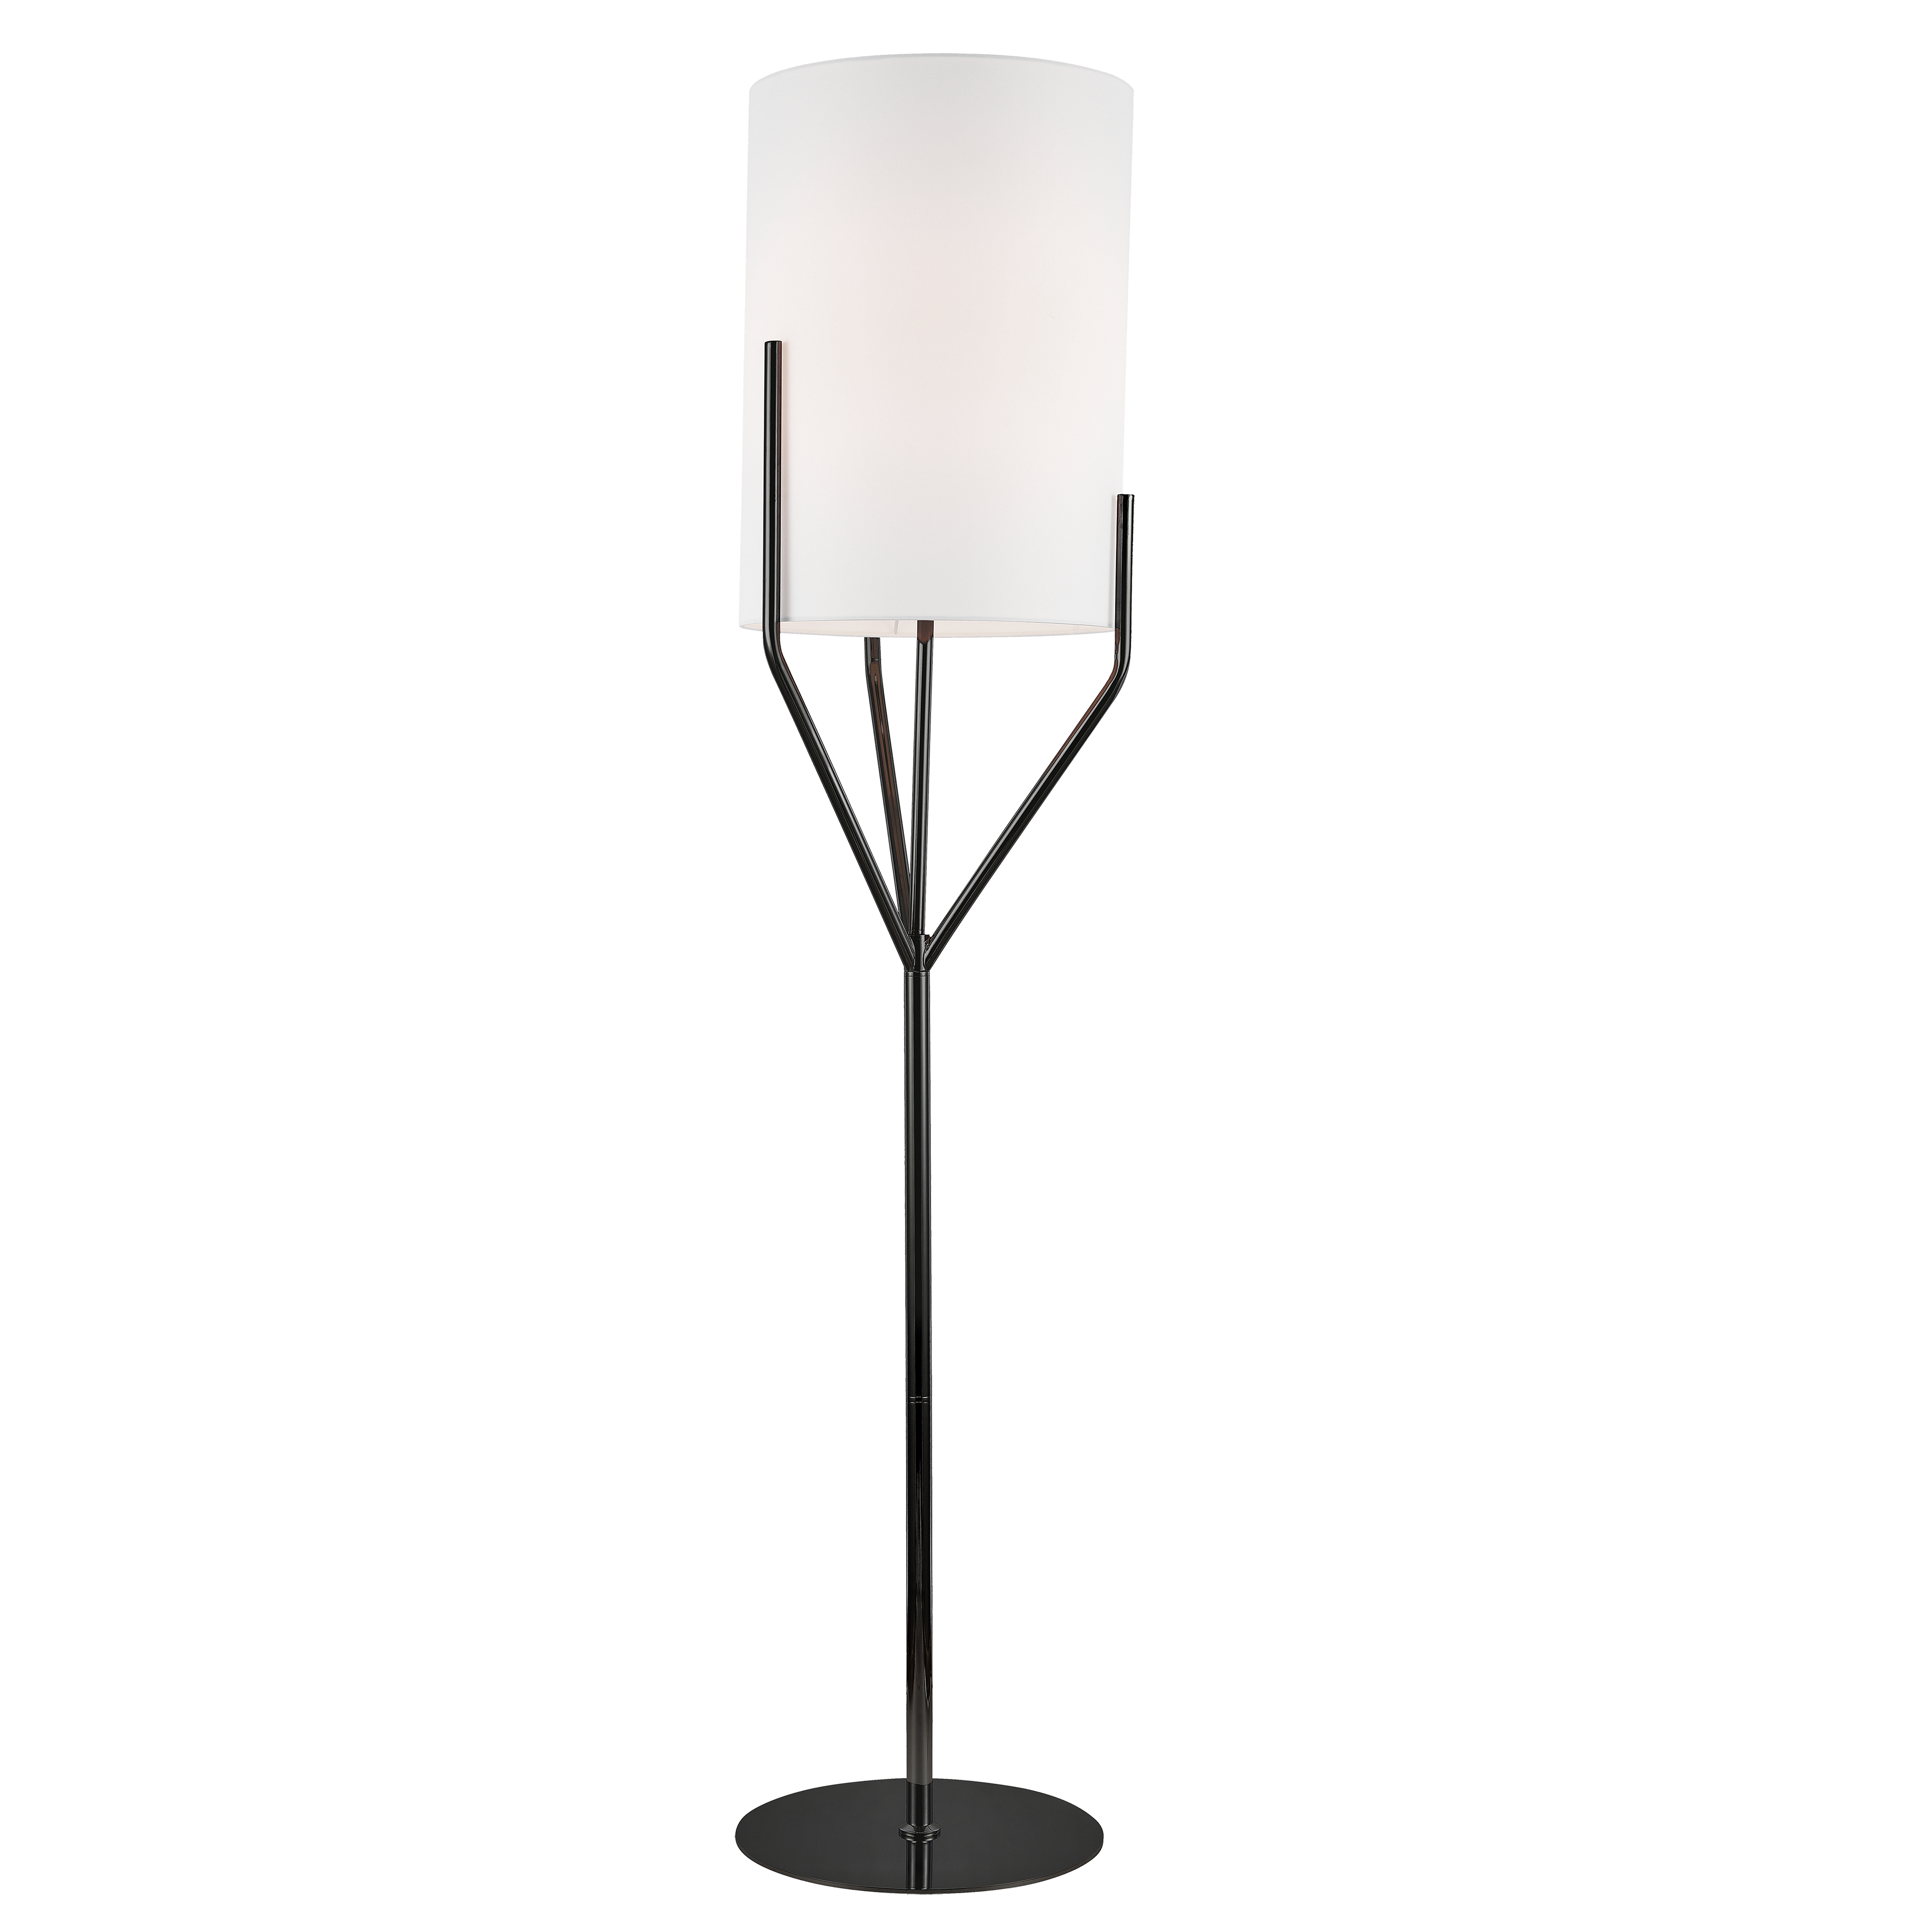 Khloe lighting offers a distinctive design in a floor lamp that will enhance the modern or contemporary décor in any size room. It's a look based on geometry, and the perennial appeal of stylish contrasts. The base and rod in matte black finish splits into a stylized and asymmetrical pattern of four arms that hold the white fabric shade. A tall drum style shade adds an emphatic note to an artistic design. Inspired by the graceful asymmetry of the natural world, Khloe lighting adds its unique aesthetic to bedrooms, living rooms or office spaces.